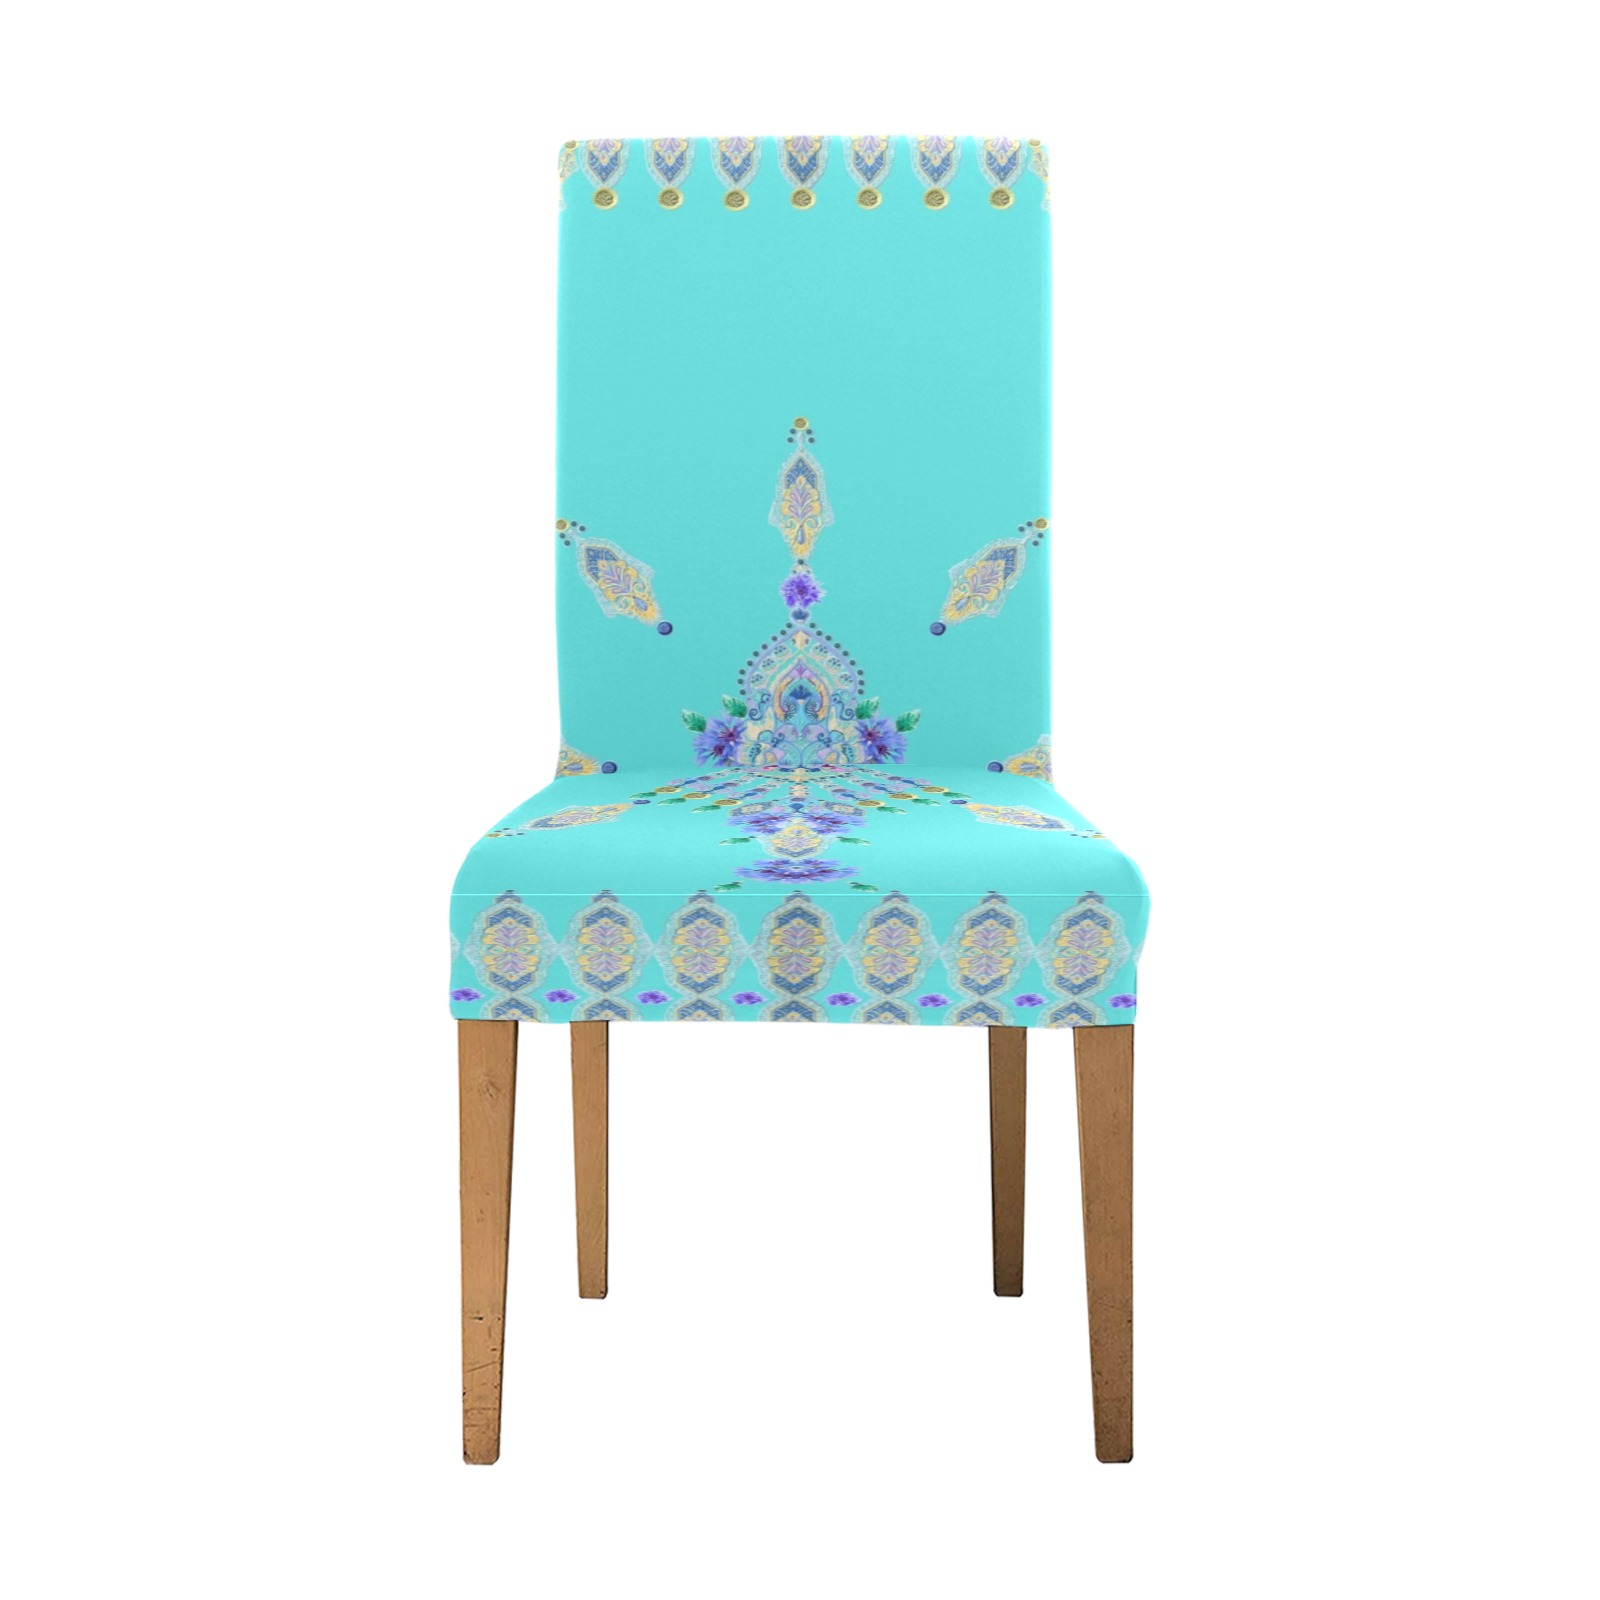 bleuet jaune Removable Dining Chair Cover